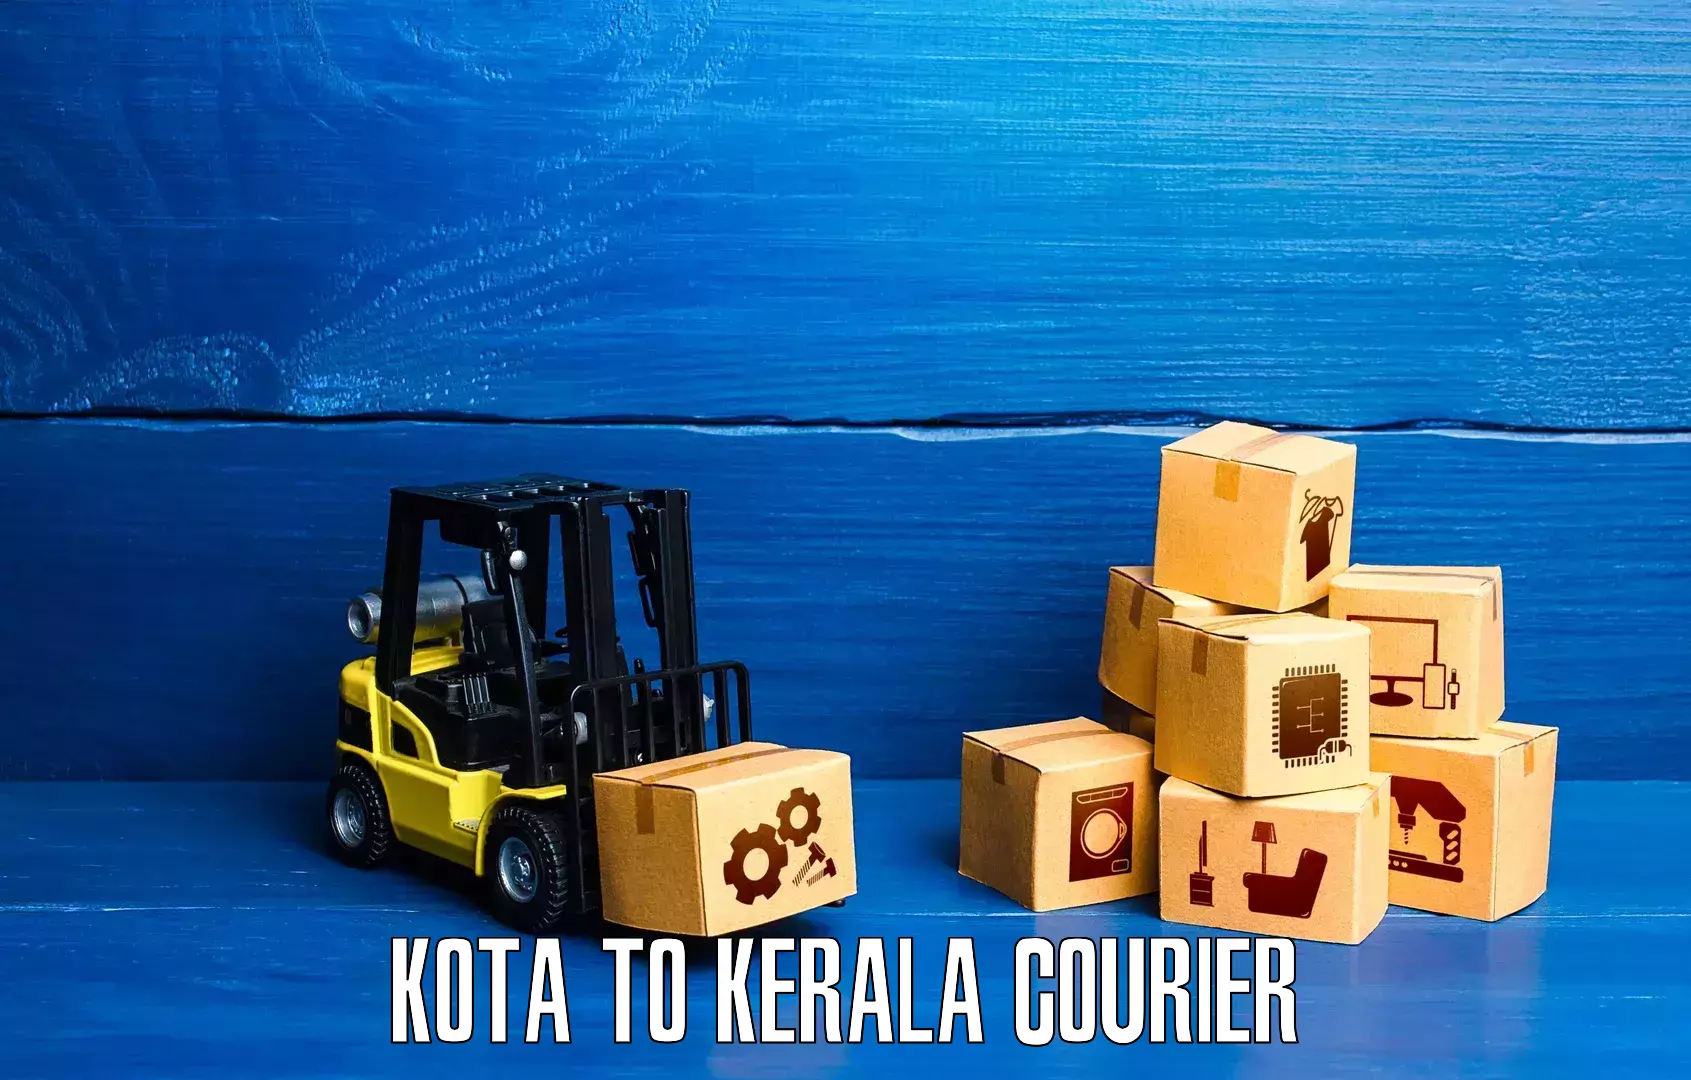 Flexible delivery schedules Kota to Kerala